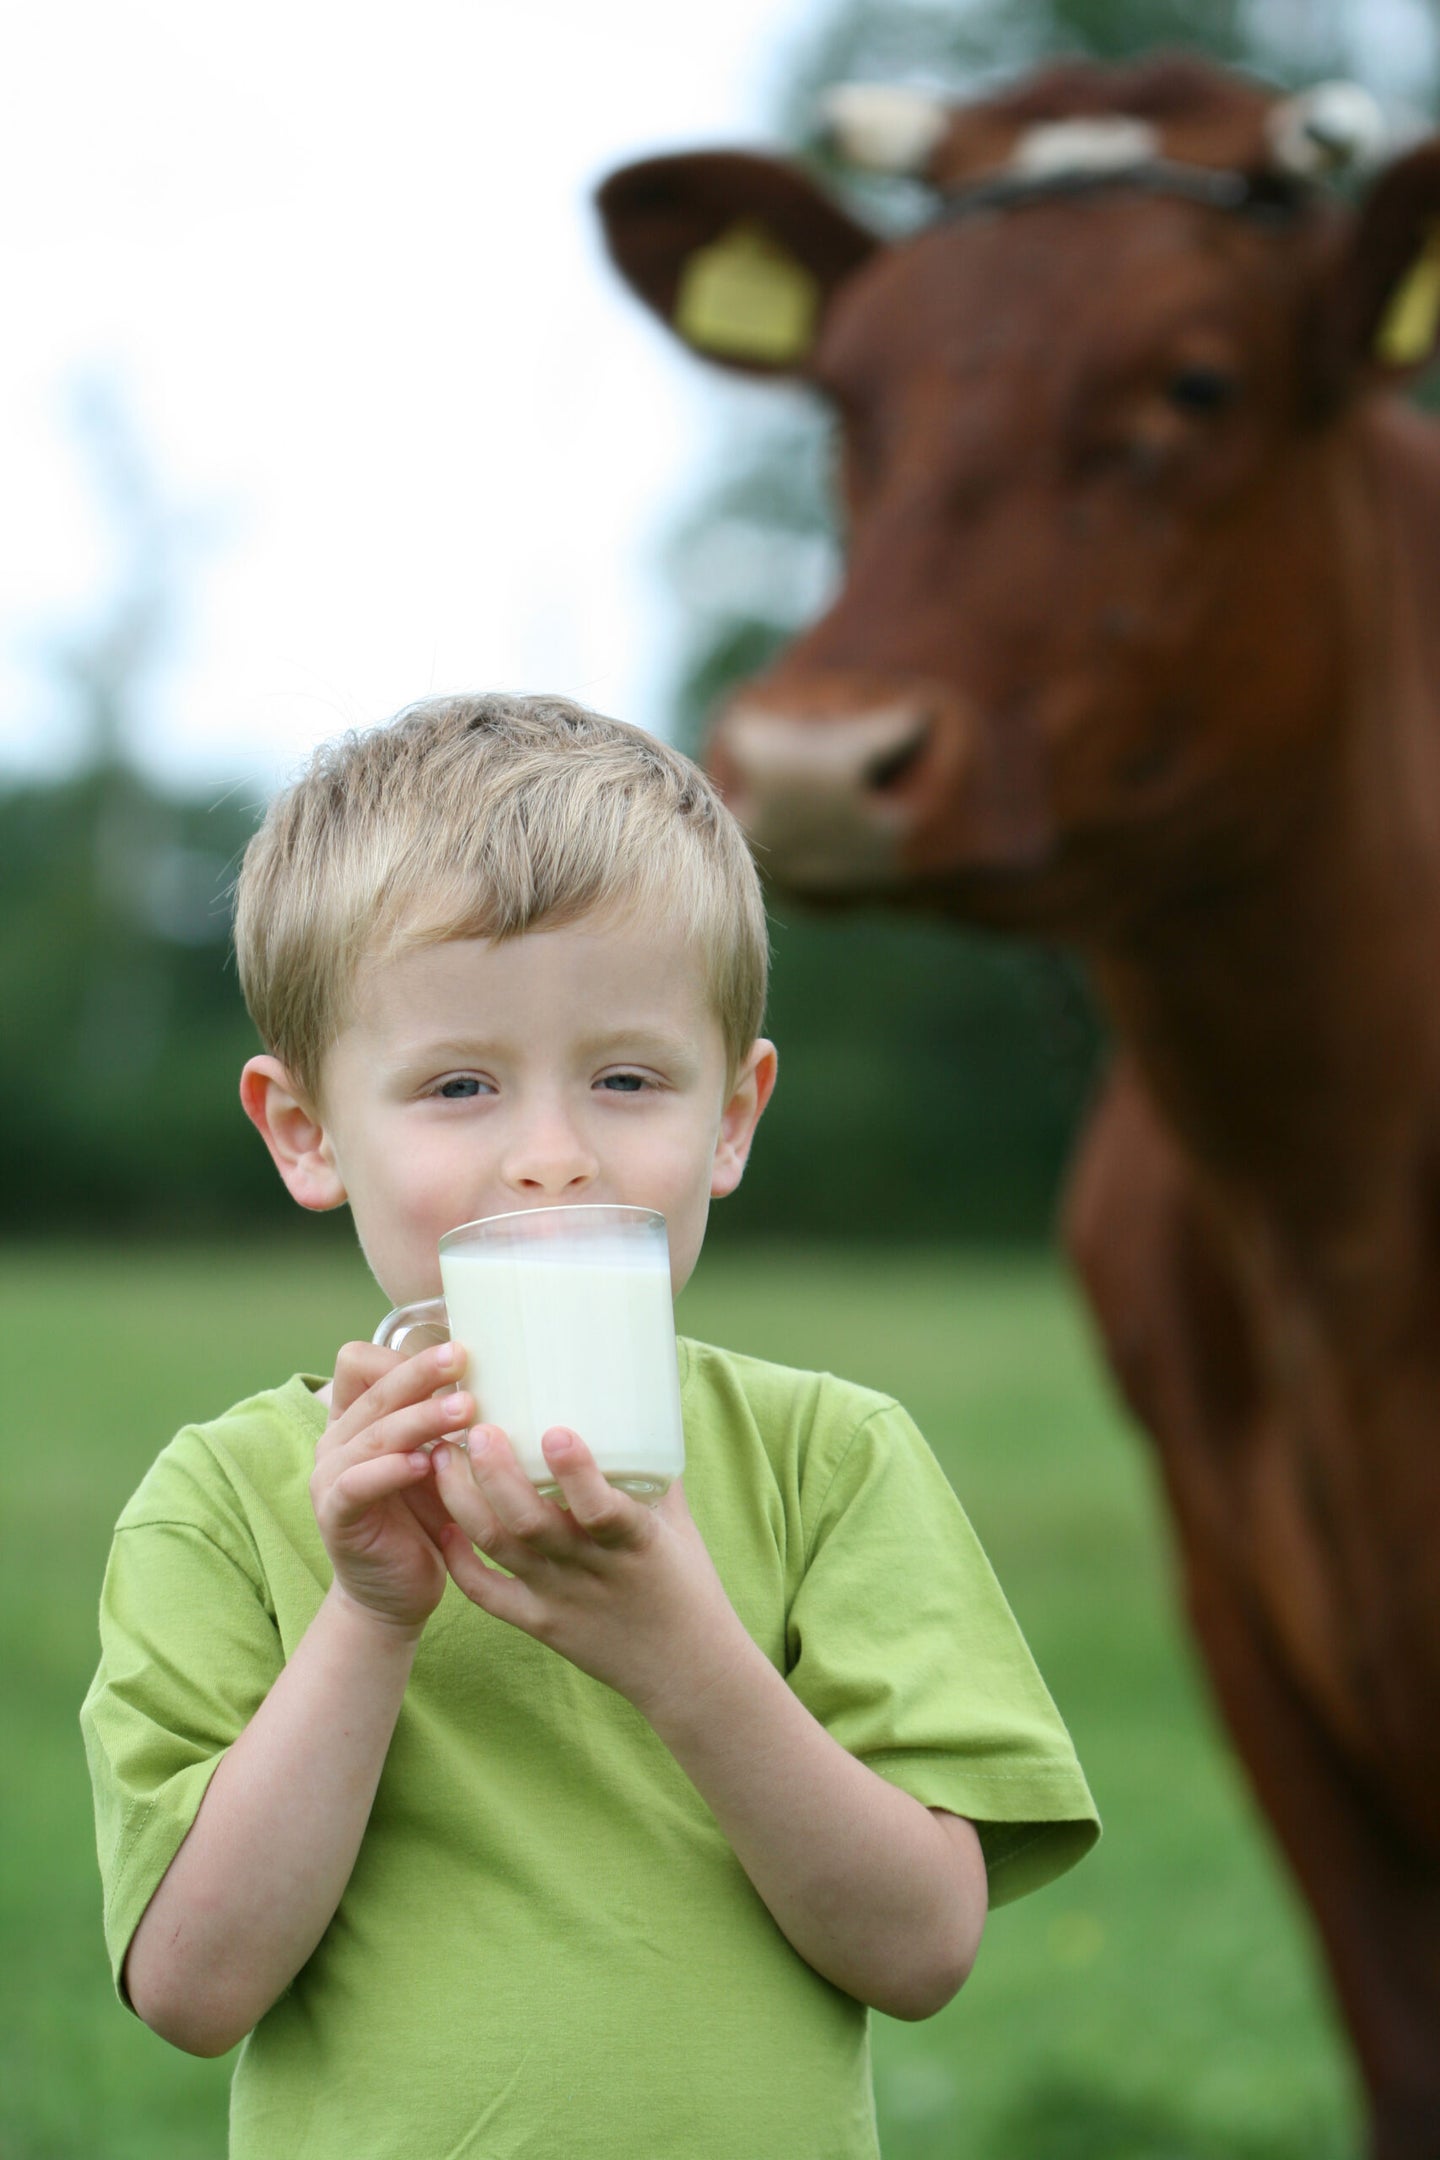 A 4- or 5-year-old boy drinking milk from a glass on a farm, while a cow stands ominously behind him.